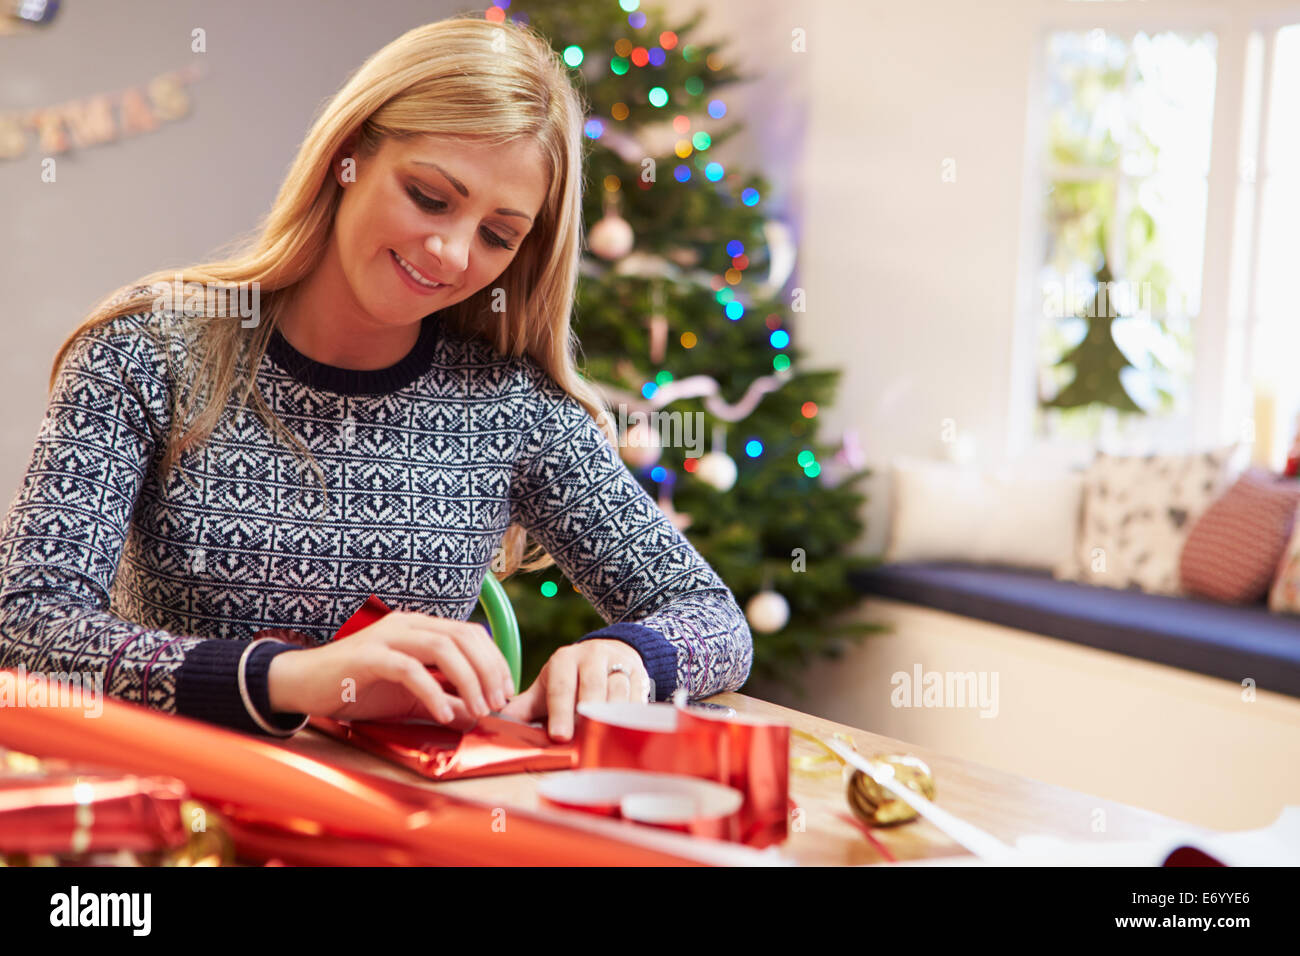 Woman Wrapping Christmas Gifts At Home Banque D'Images